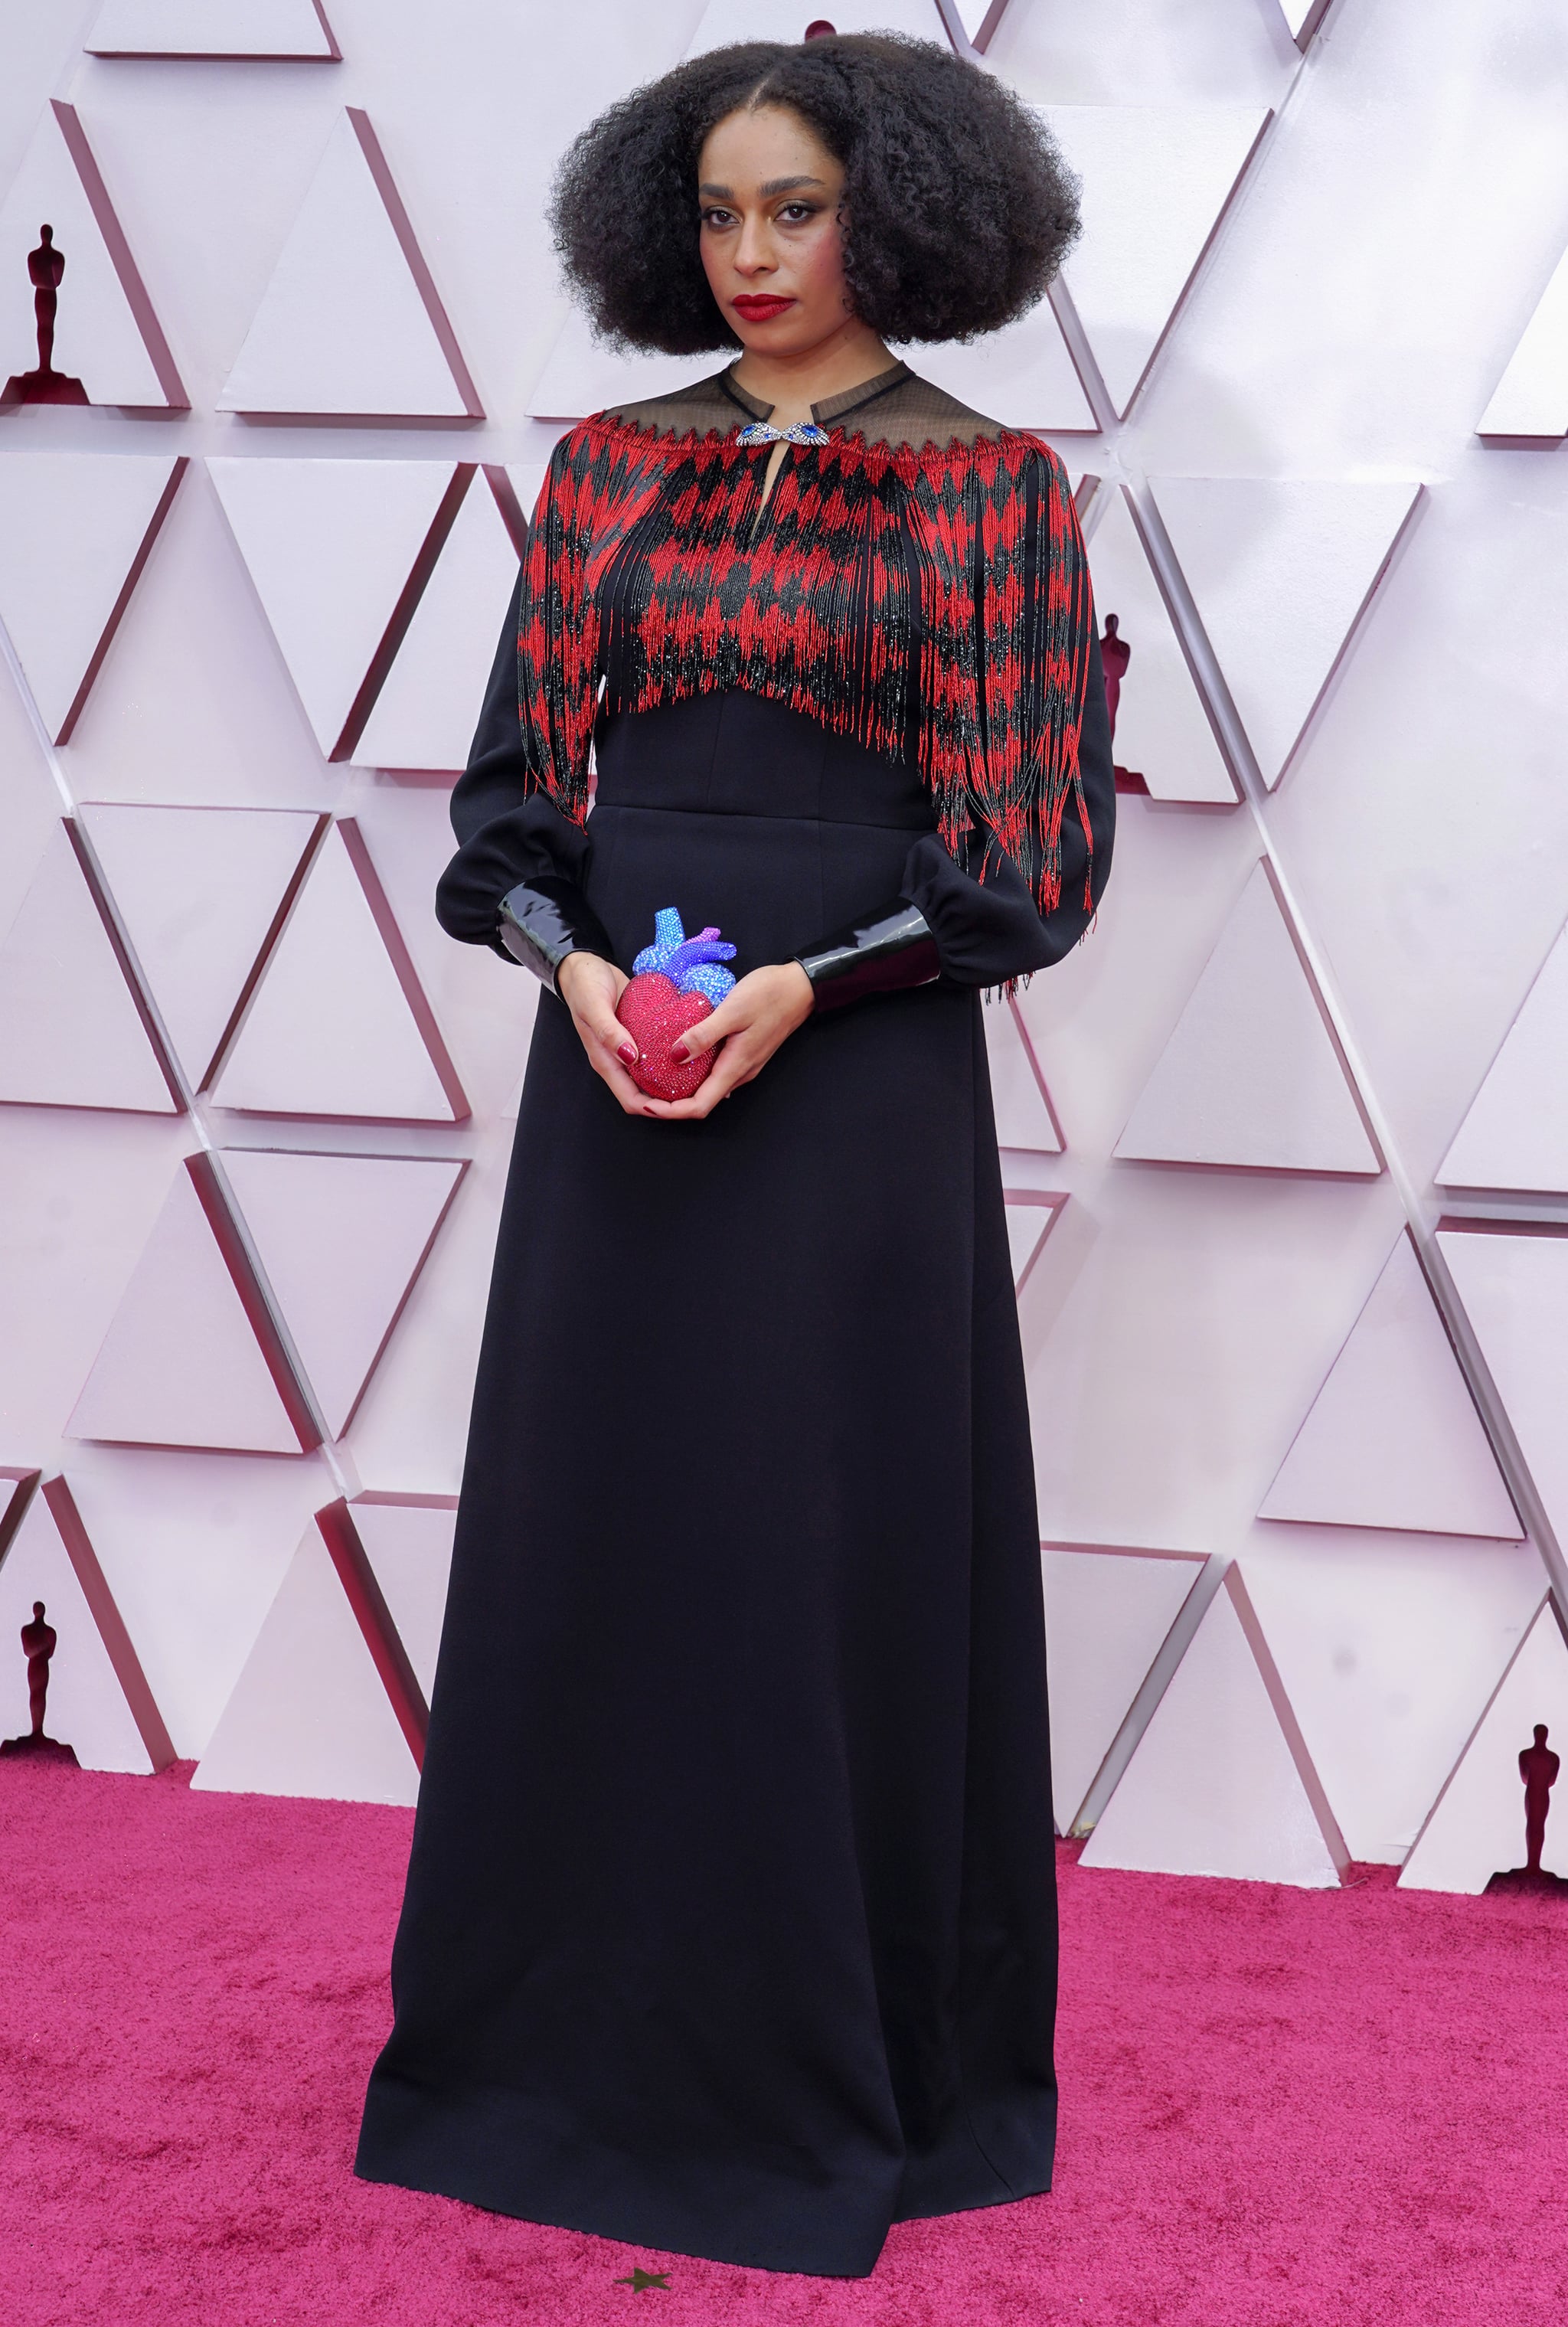 Celeste Waite at the 2021 Oscars | We&#39;d Like to Thank the Academy For Letting Us Witness These 2021 Oscars Red Carpet Looks | POPSUGAR Fashion Photo 20